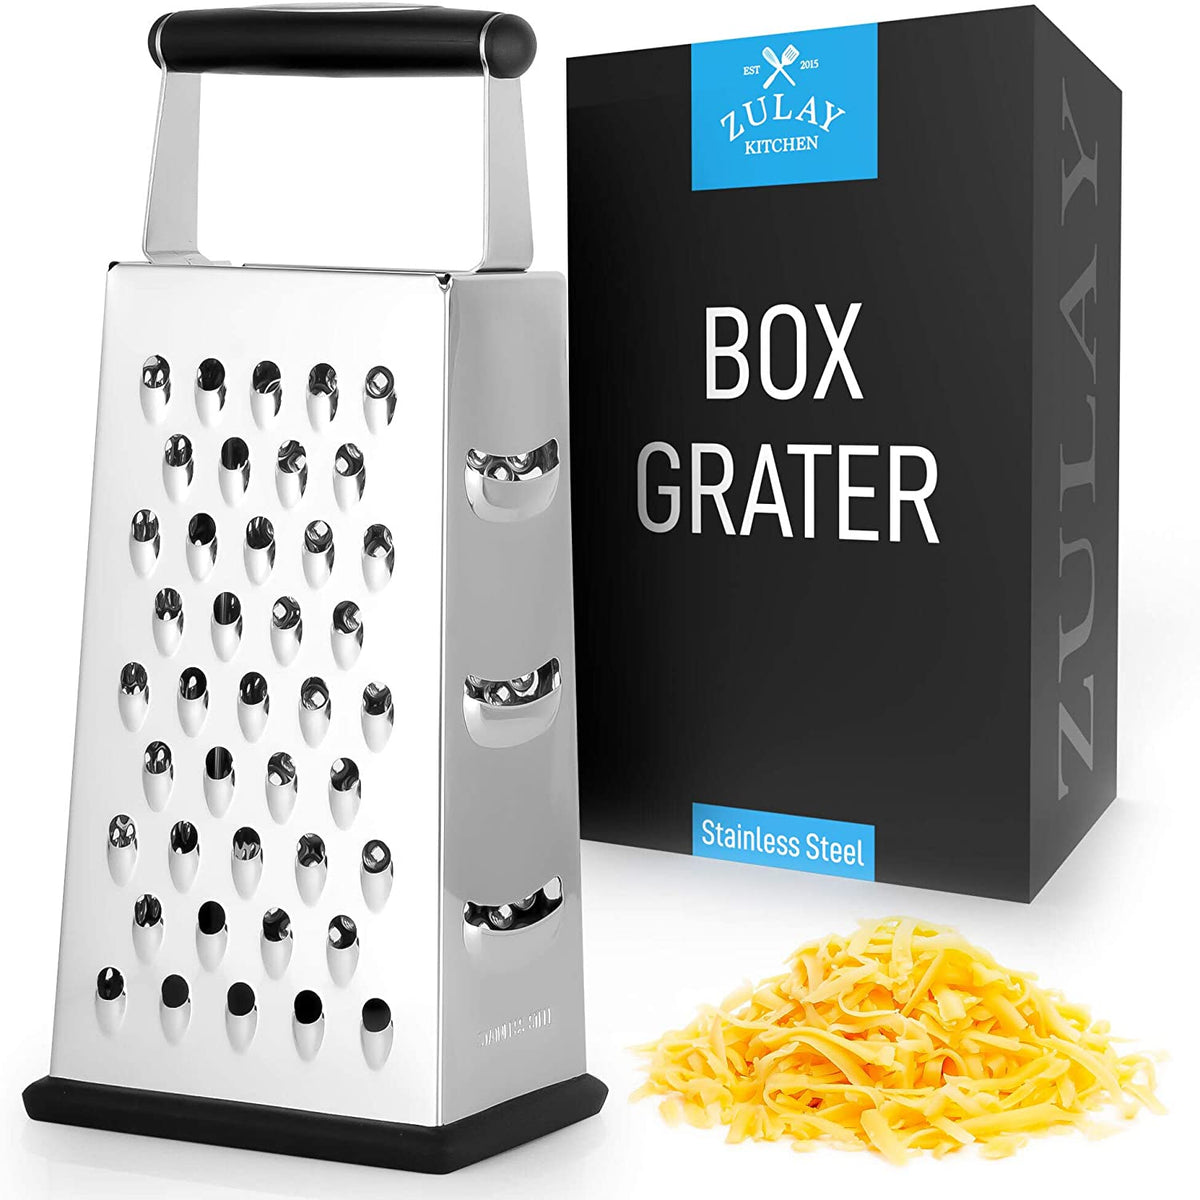 Zulay Kitchen Stainless Steel Flat Cheese Grater - Orange - 136 requests